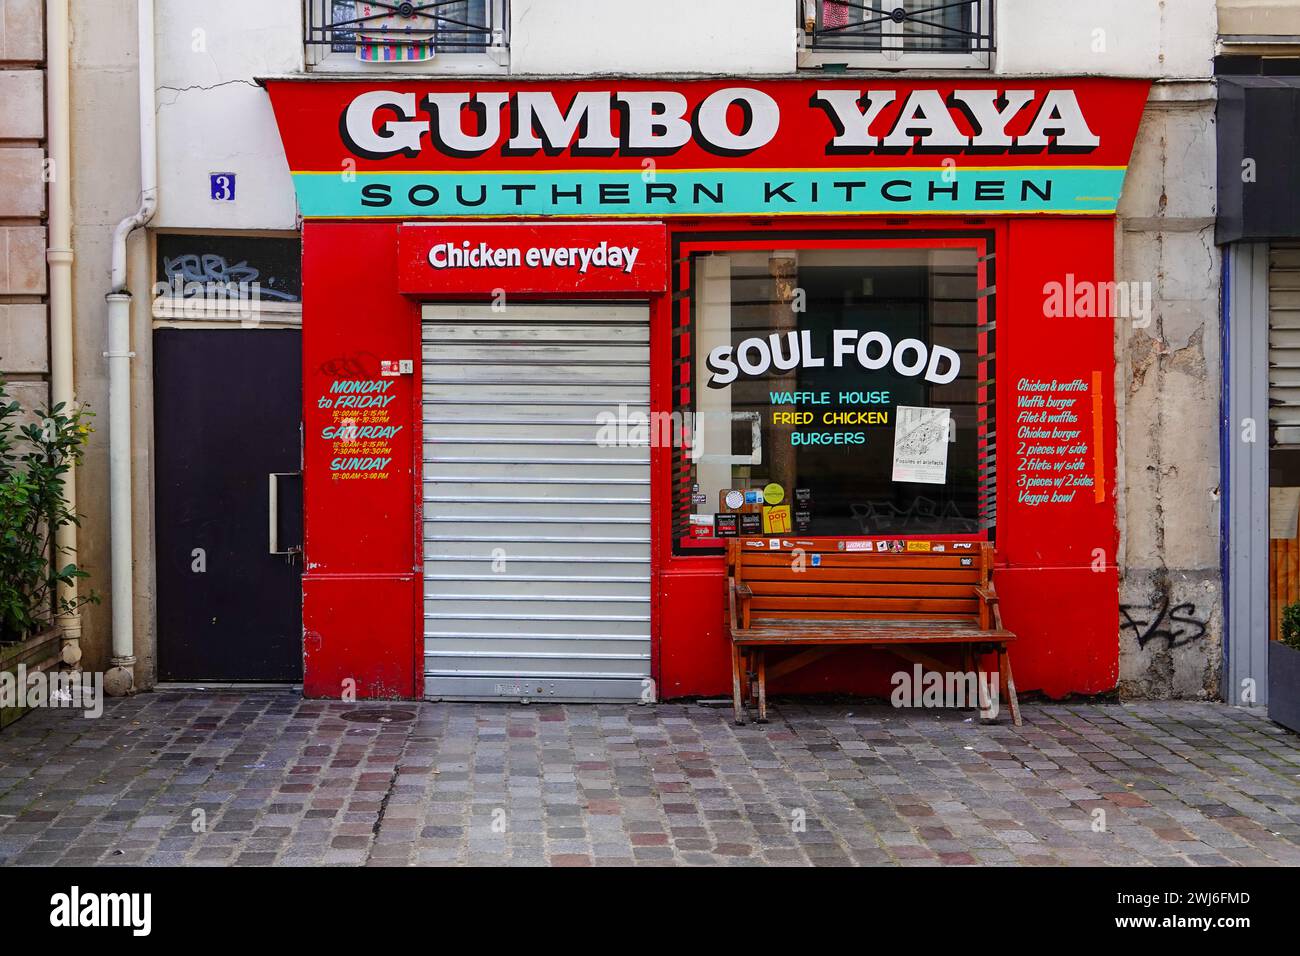 Gumbo Yaya, southern style, soul food, southern kitchen, restaurant, including chicken and waffles, in the 10th arrondissement, Paris, France. Stock Photo